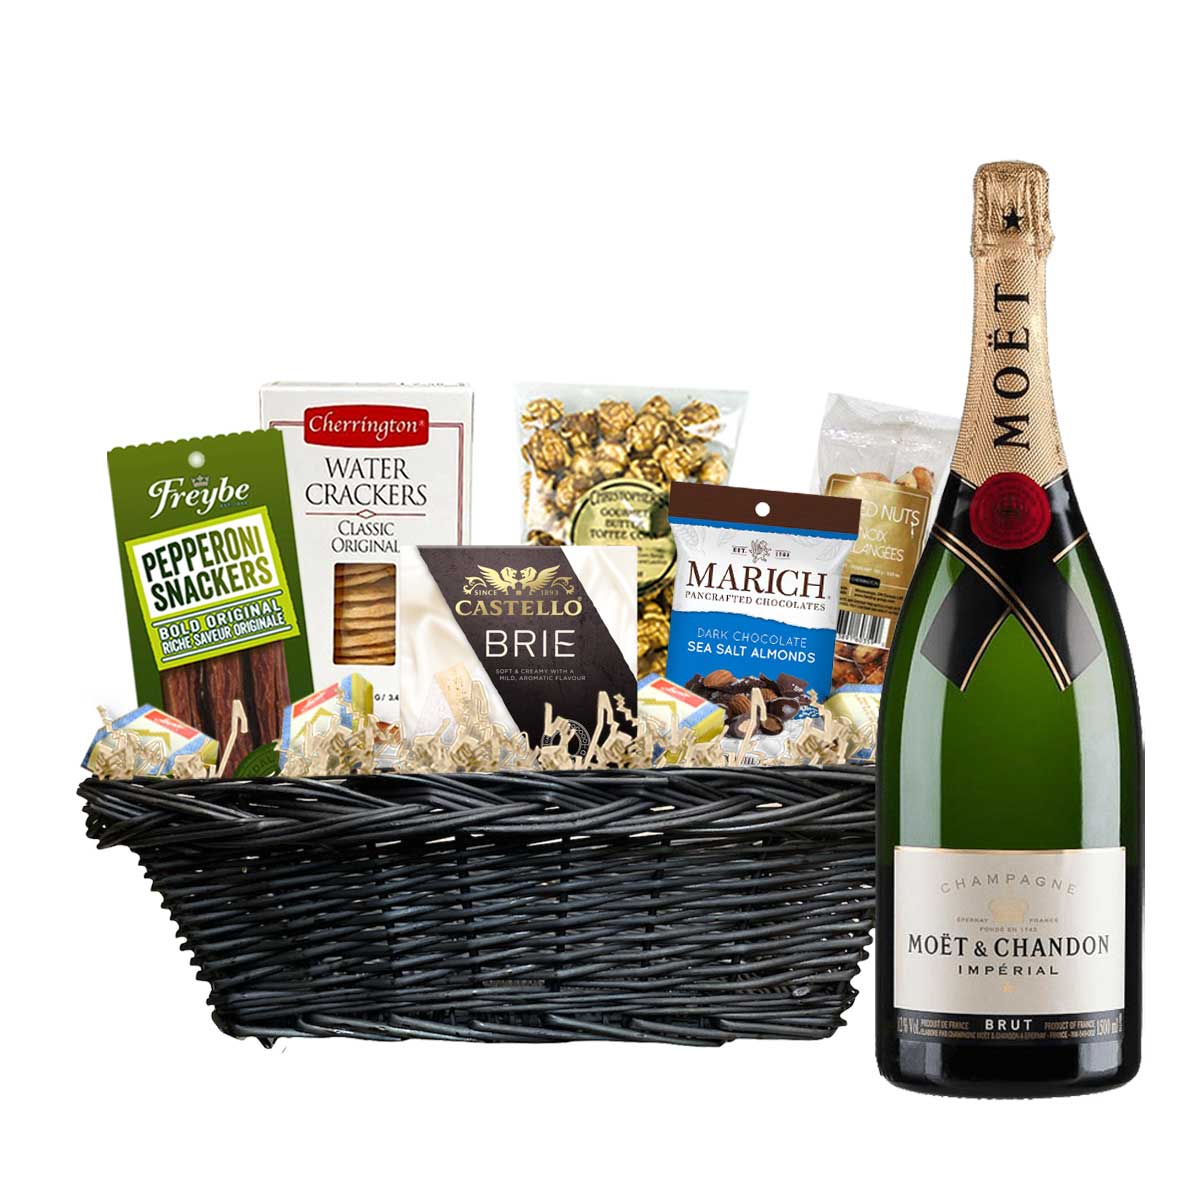 TAG Liquor Stores Canada Delivery-Moet & Chandon Champagne 750ml Corporate Gift Basket-wine-tagliquorstores.com